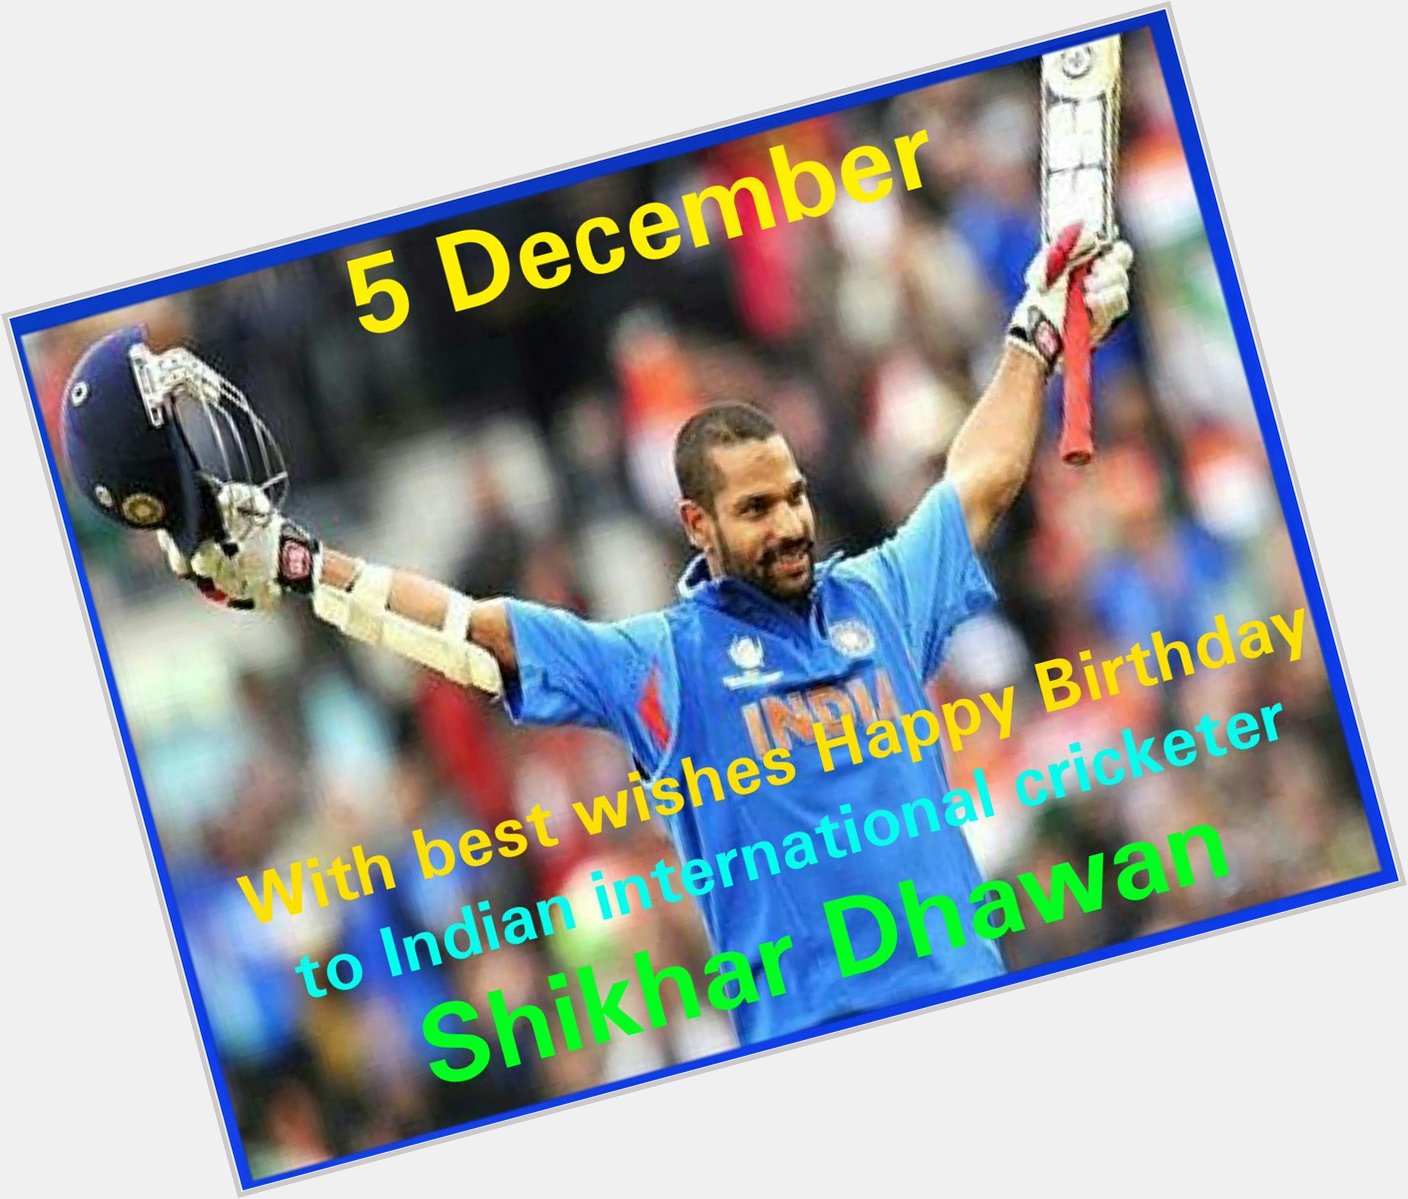 With best wishes Happy Birthday to Indian international cricketer 
Shikhar Dhawan : Pride of India 